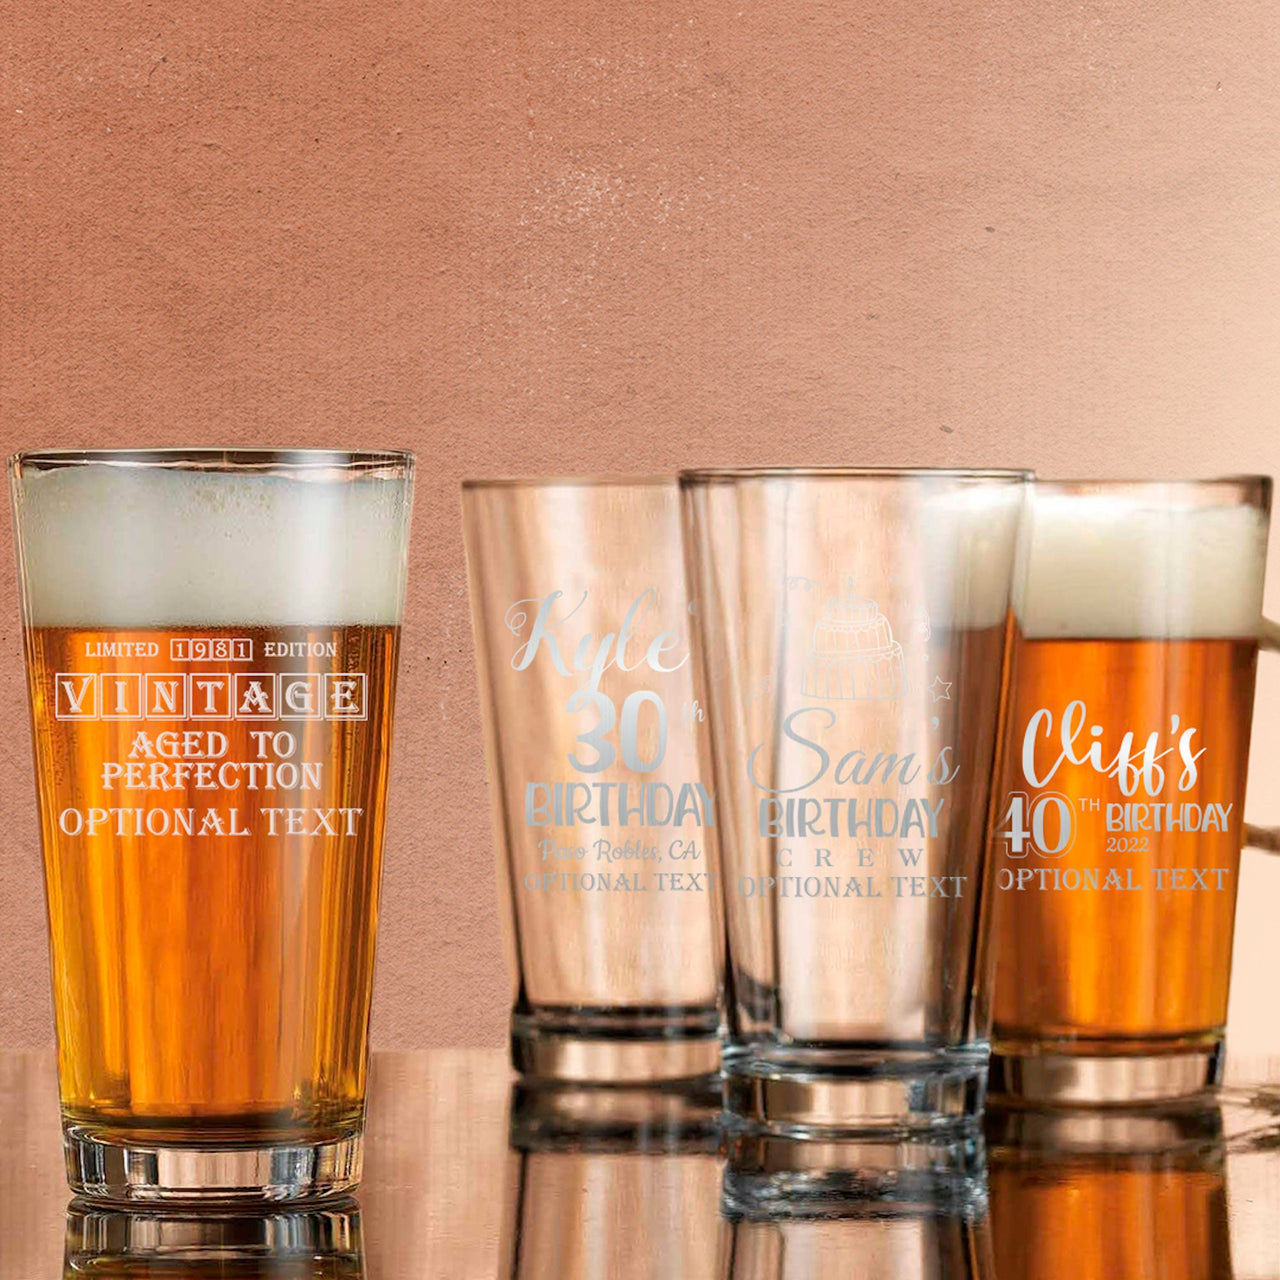 Personalized Engraved Beer Glass, Birthday Beer Glass, Birthday Gift For Him, Gift For Dad, 30th Birthday, 40th Birthday, Husband Gift